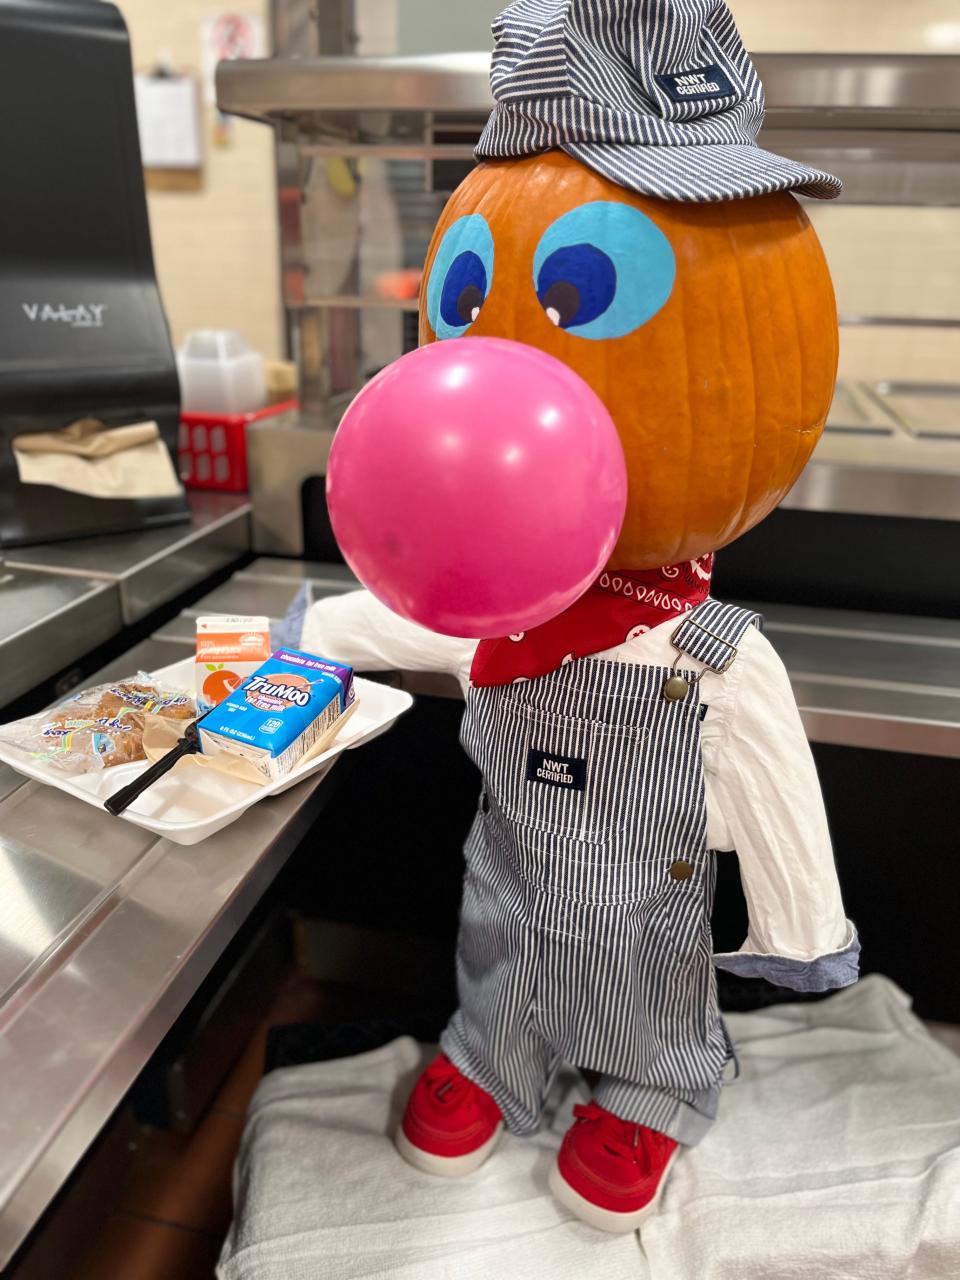 "Bubble Blowing Breakfast at Powell Elementary" won the Knox County Schools Nutrition Department's Great Pumpkin Contest.